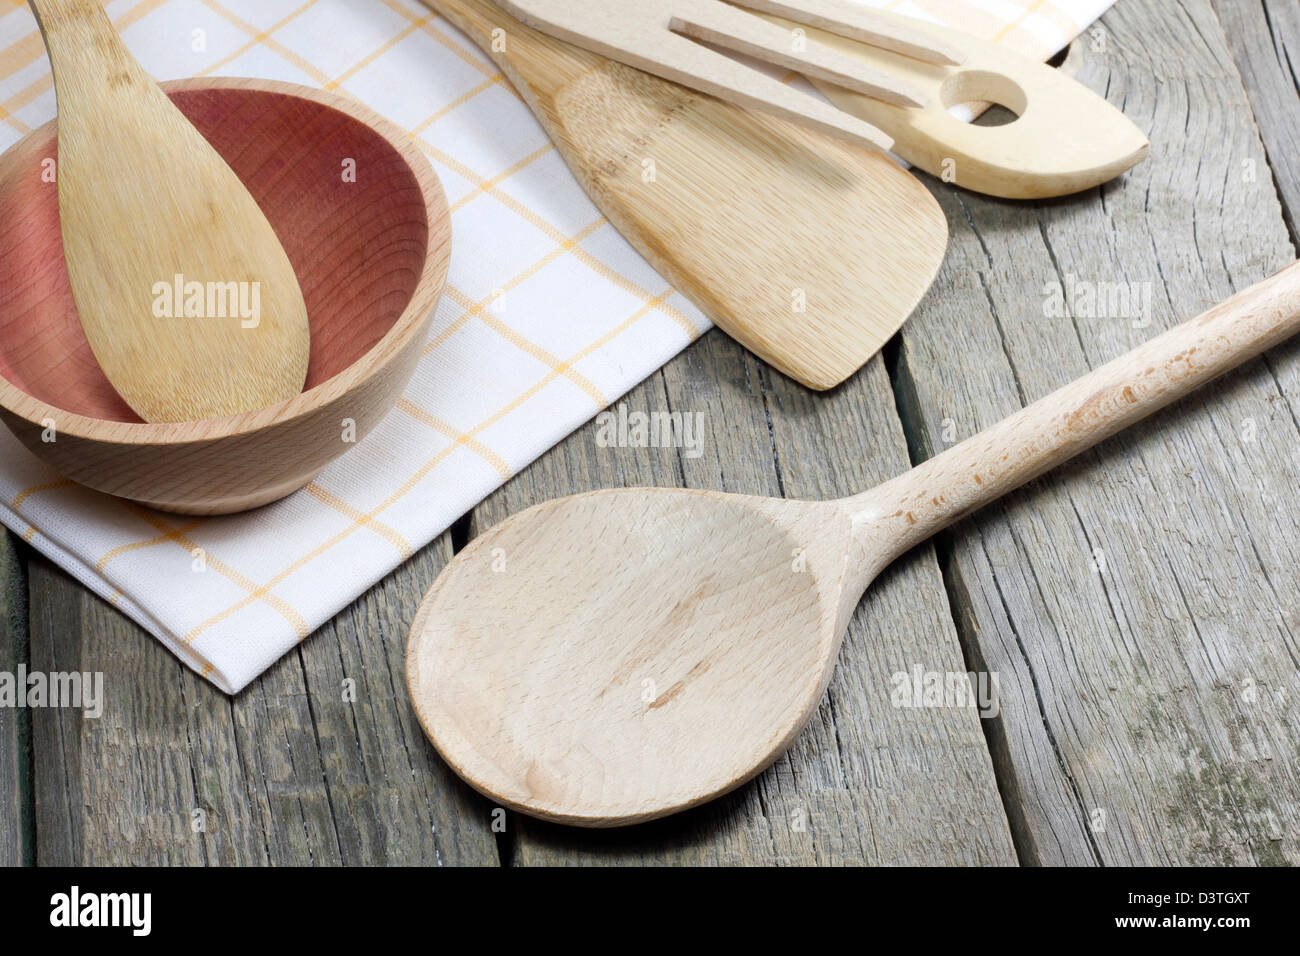 Old retro kitchenware on wooden boards Stock Photo